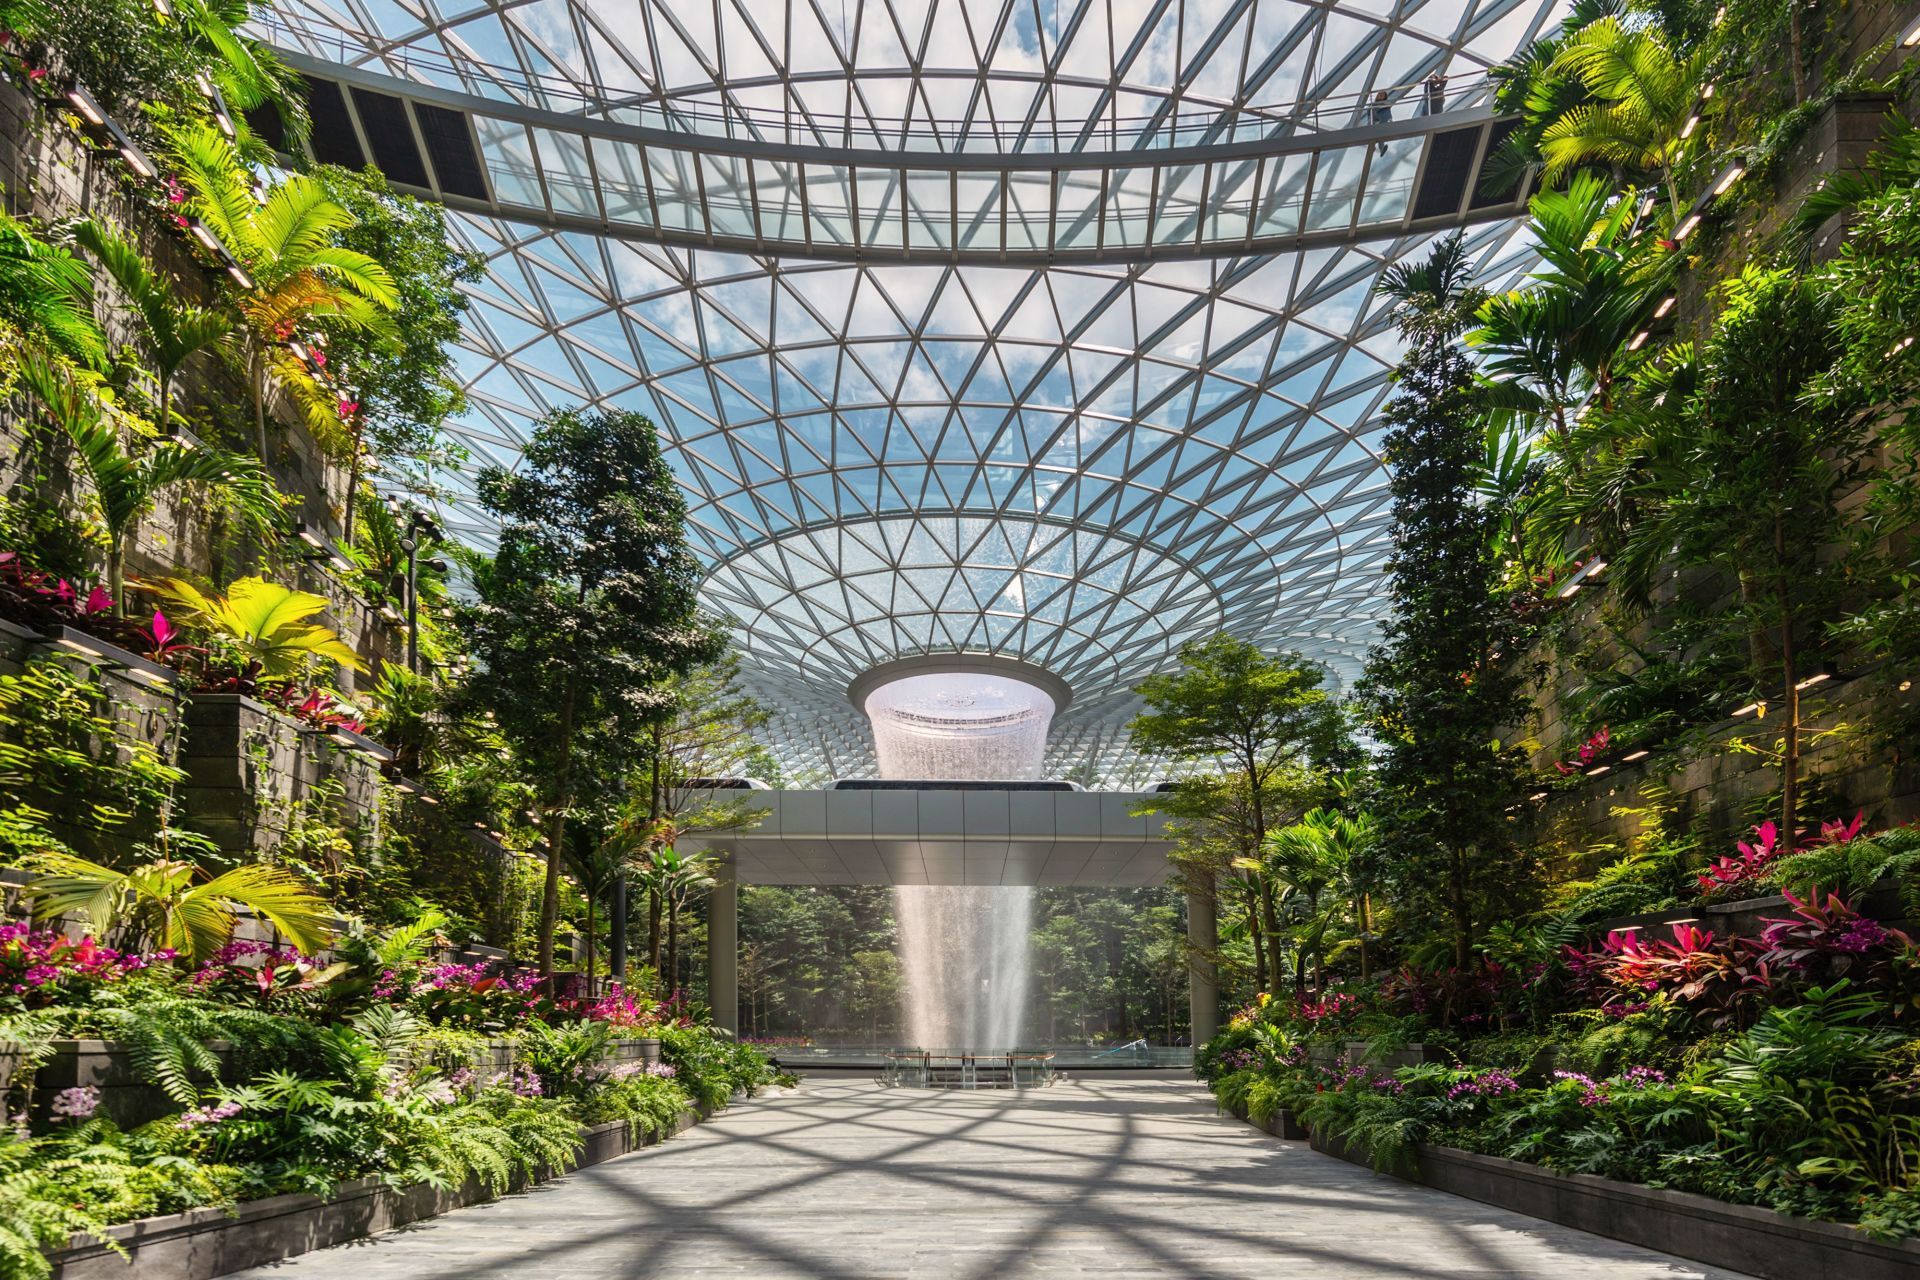  The Rain Vortex will pour rainwater down a seven-storey drop. The 40-metre-tall Rain Vortex – the world's tallest indoor waterfall – is the centrepiece of Singapore's soon-to-open Jewel Changi Airport, designed by Moshe Safdie's architecture firm. Photo by Peter Walker Partners Landscape